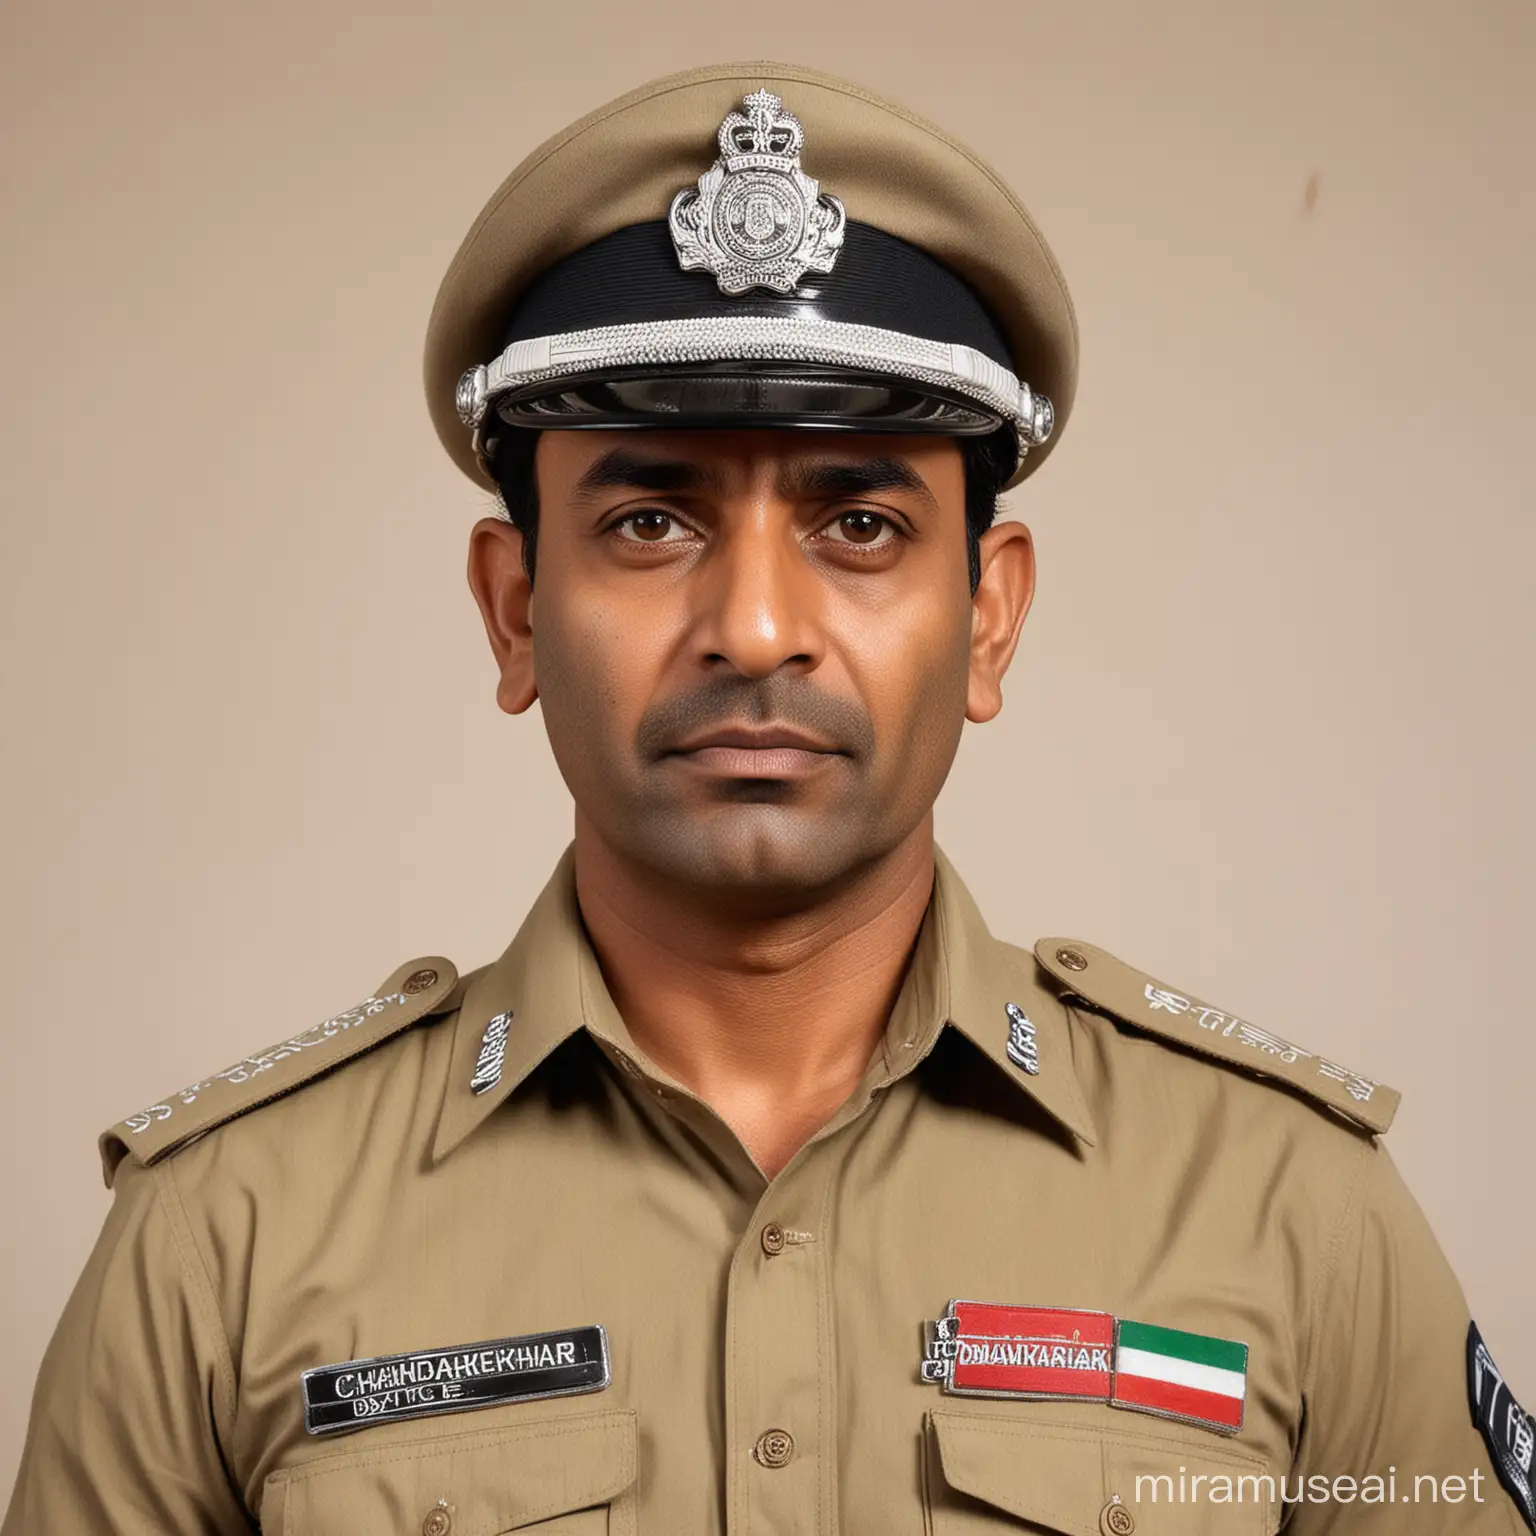 52 year old aggressive, sharp, smart looking and well built indian police officer in khakhi uniform. Name plate reads 'CHANDRASEKHAR'